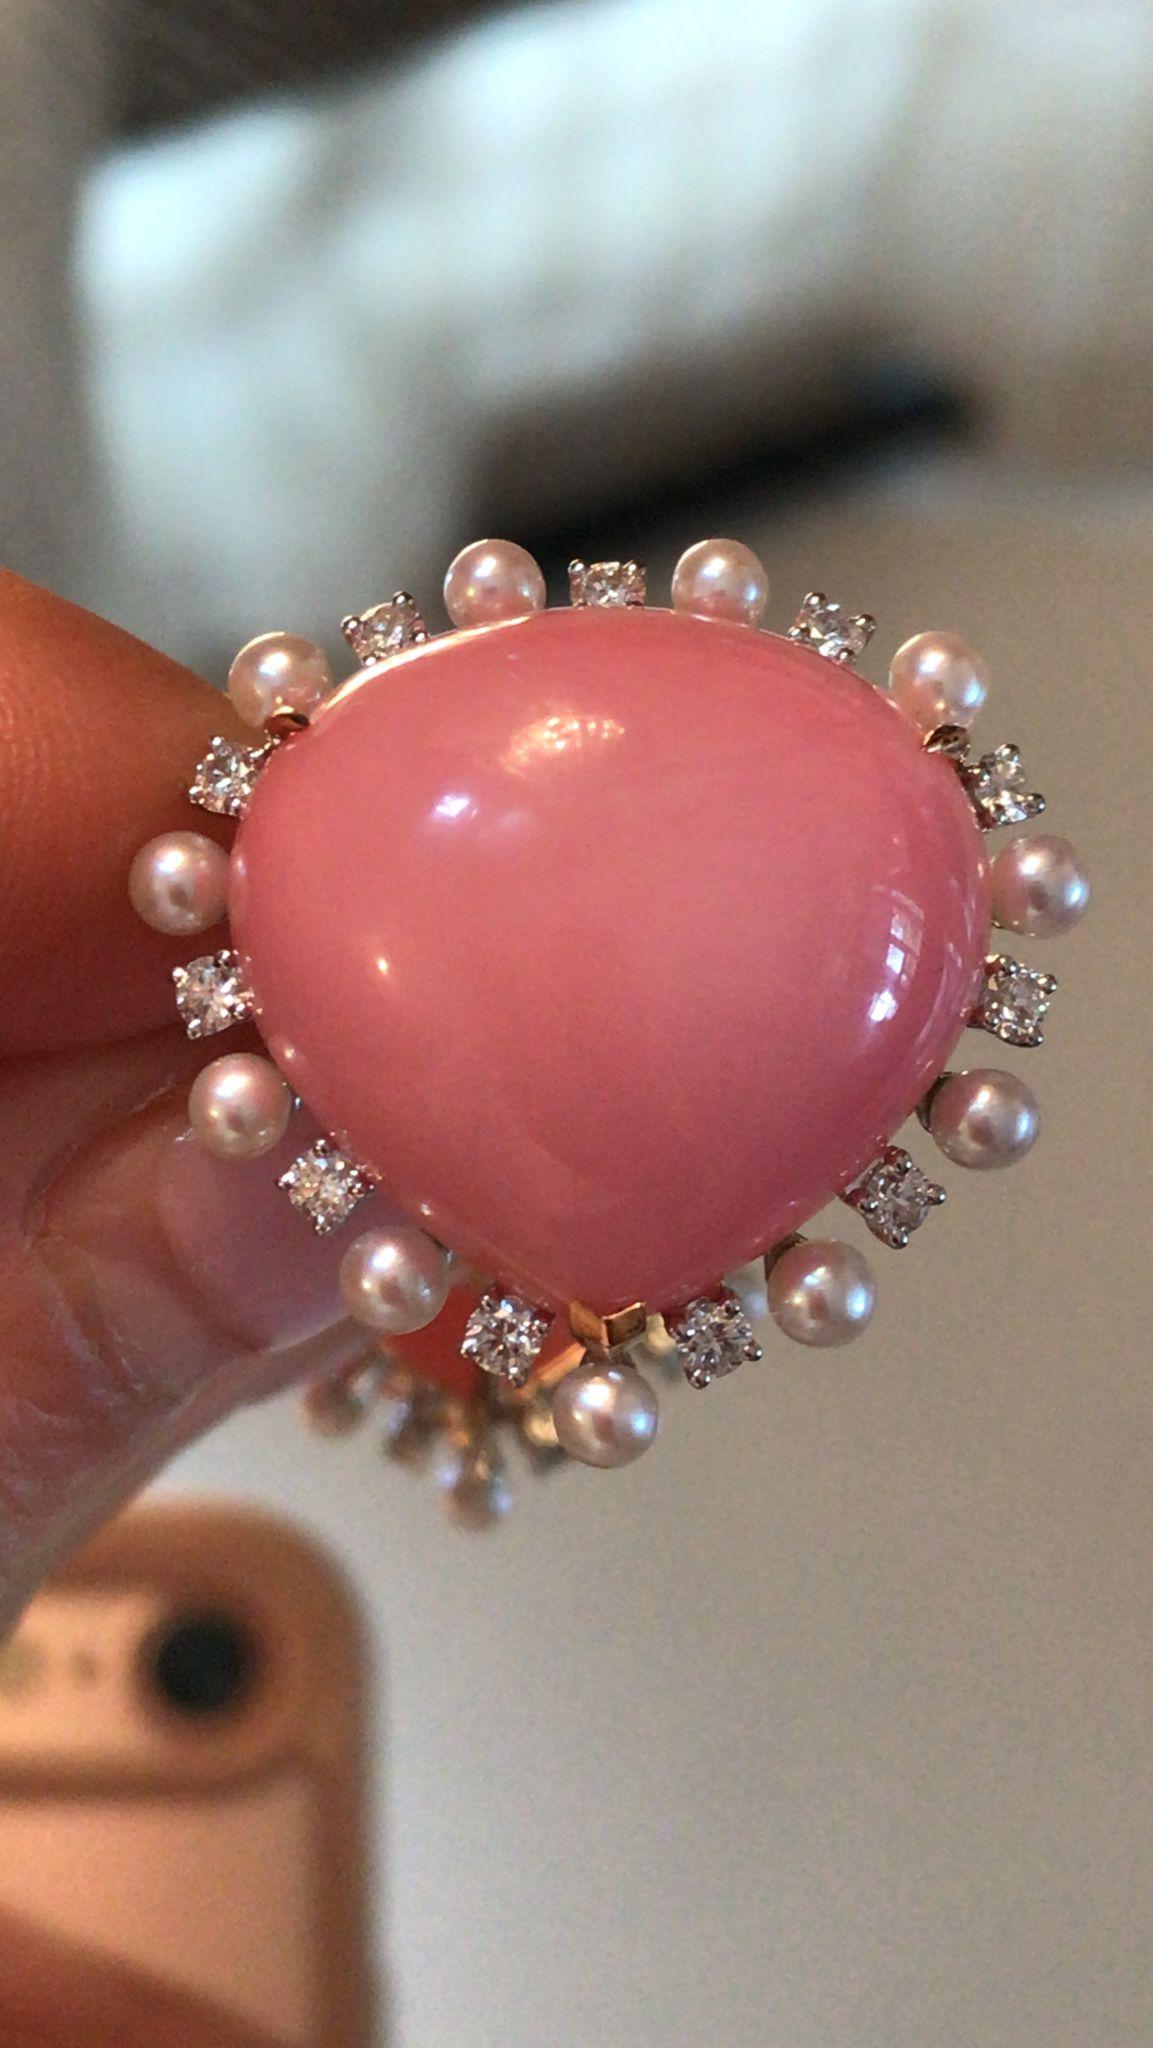 GILIN 18K White Gold Ring with Pink Opal, Pearl and Diamond

Pink Opal inherently symbolizes protection. Along with other pink gemstones, pink opal represents love, gentleness, and healing.

Pearls symbolize purity, balance, and inner wisdom, often